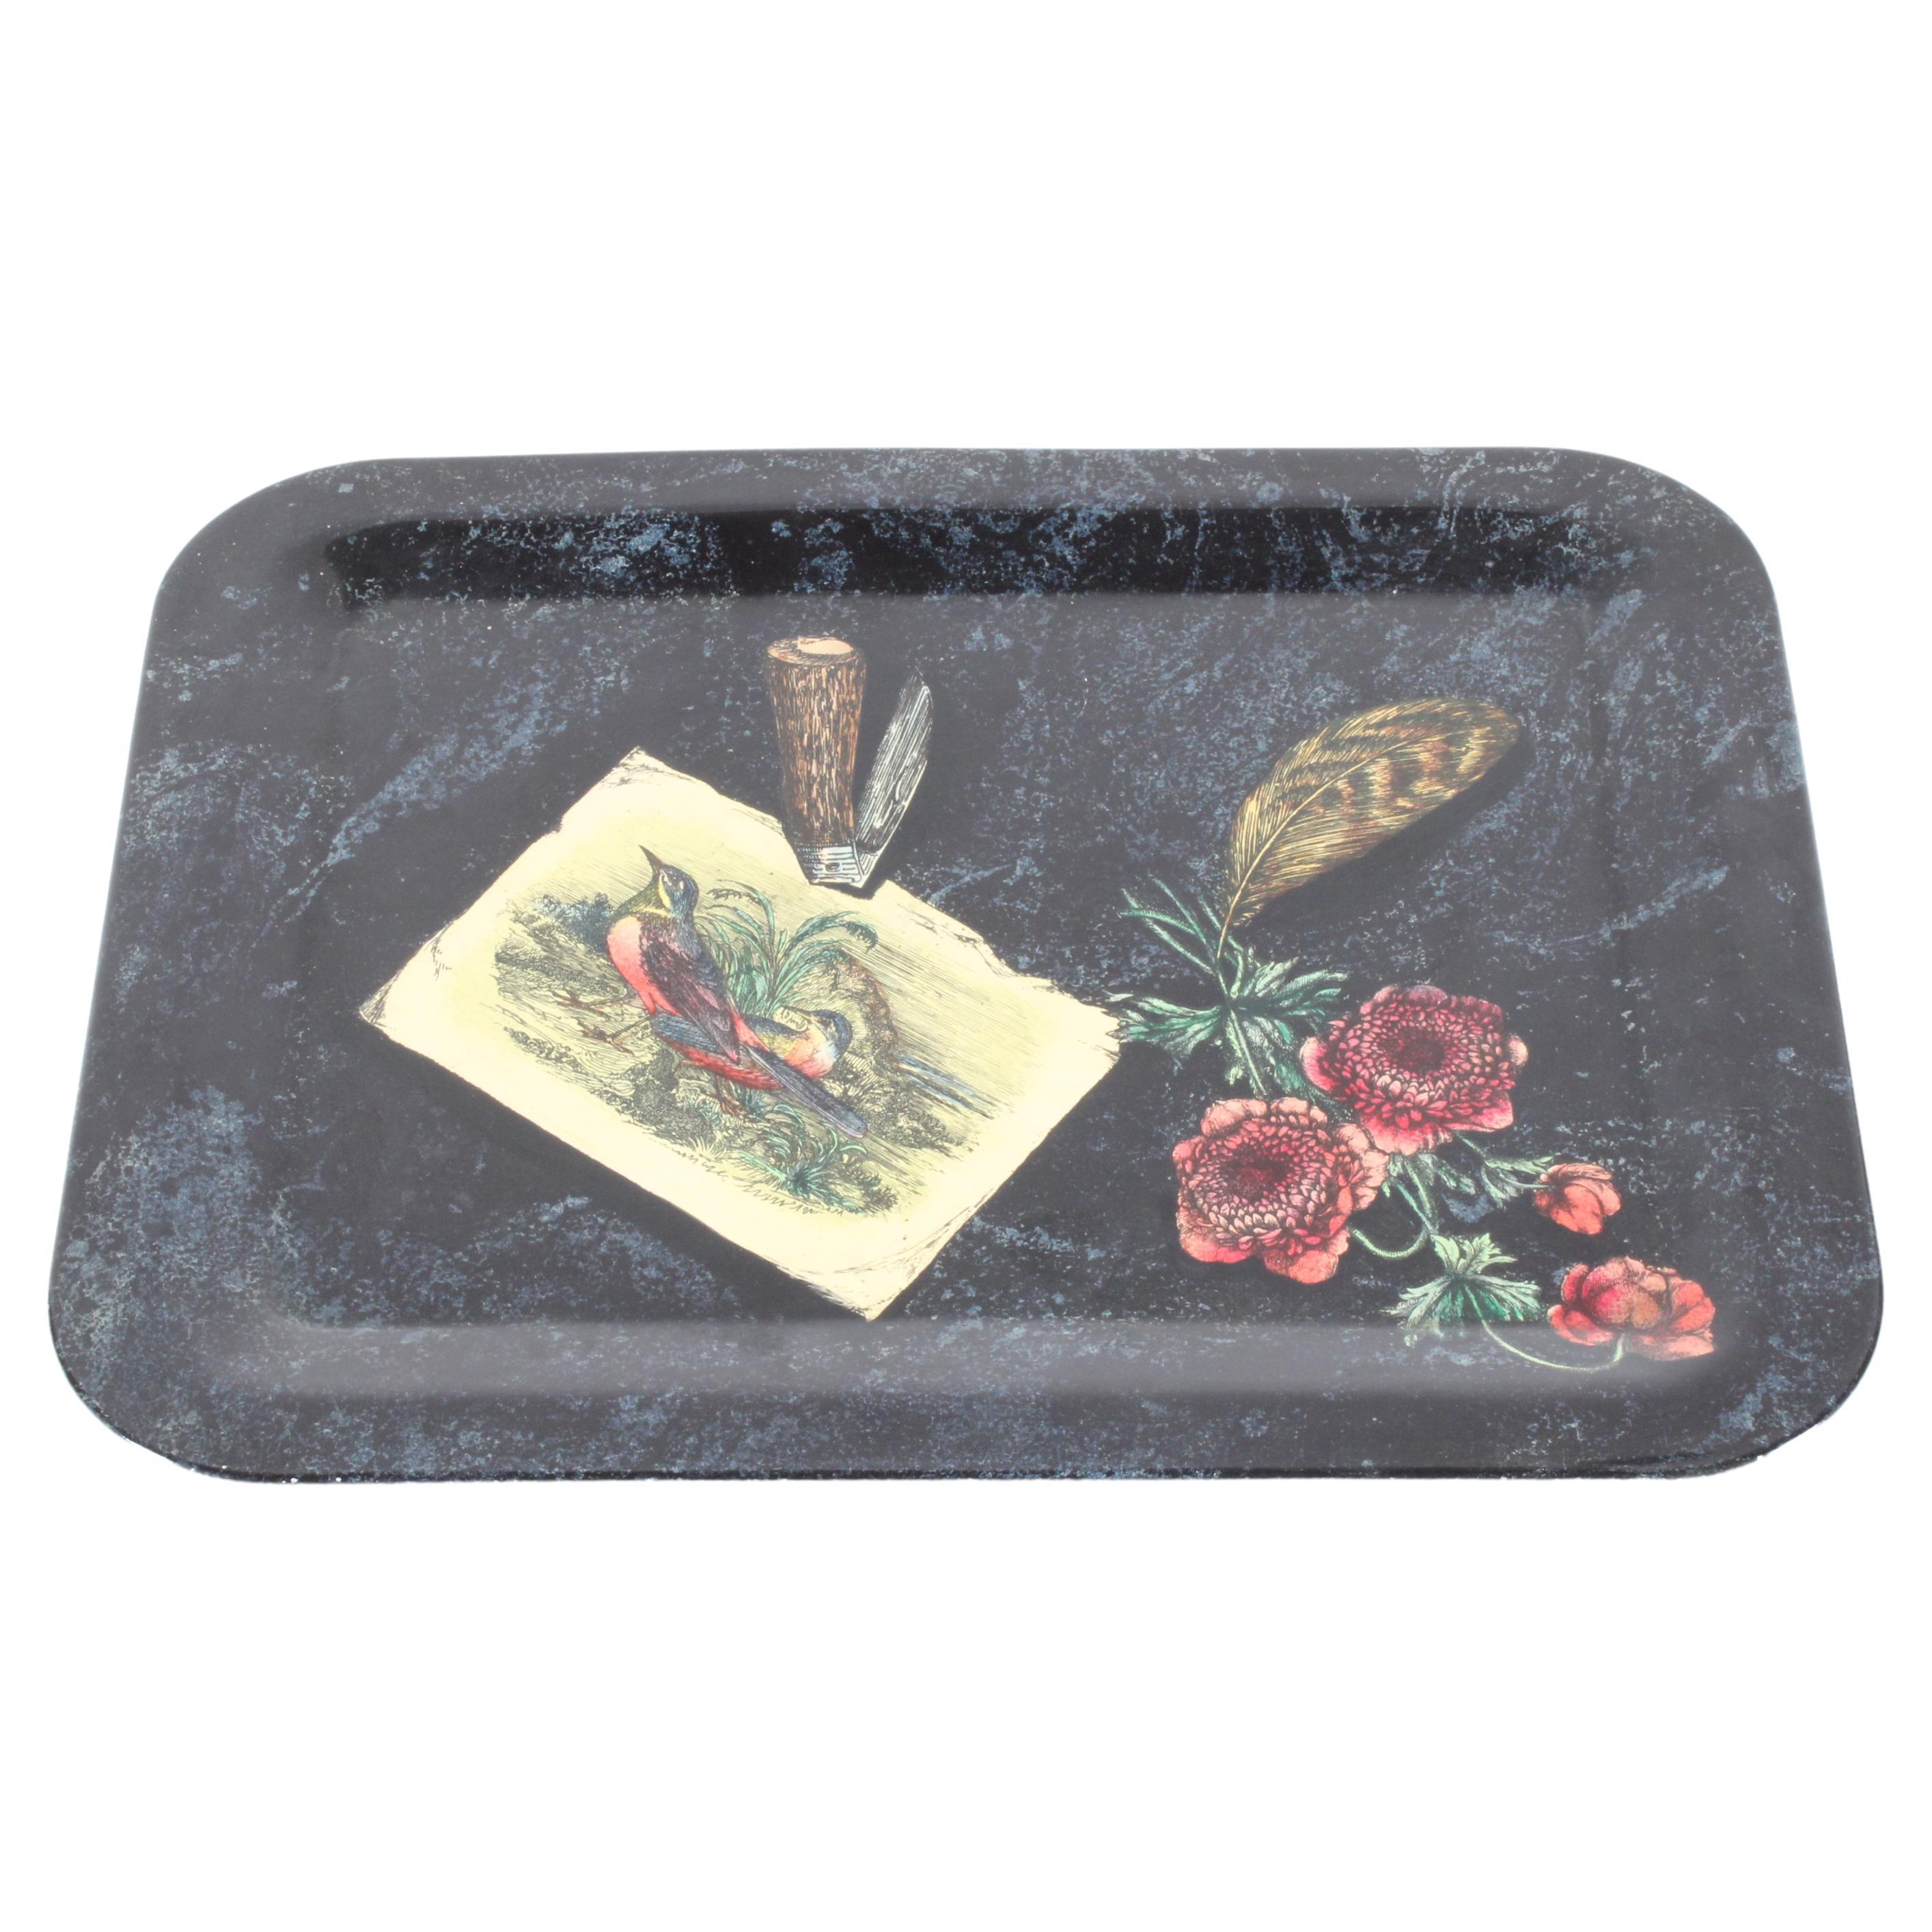 Exquisite Original Midcentury Fornasetti Serving Tray For Sale